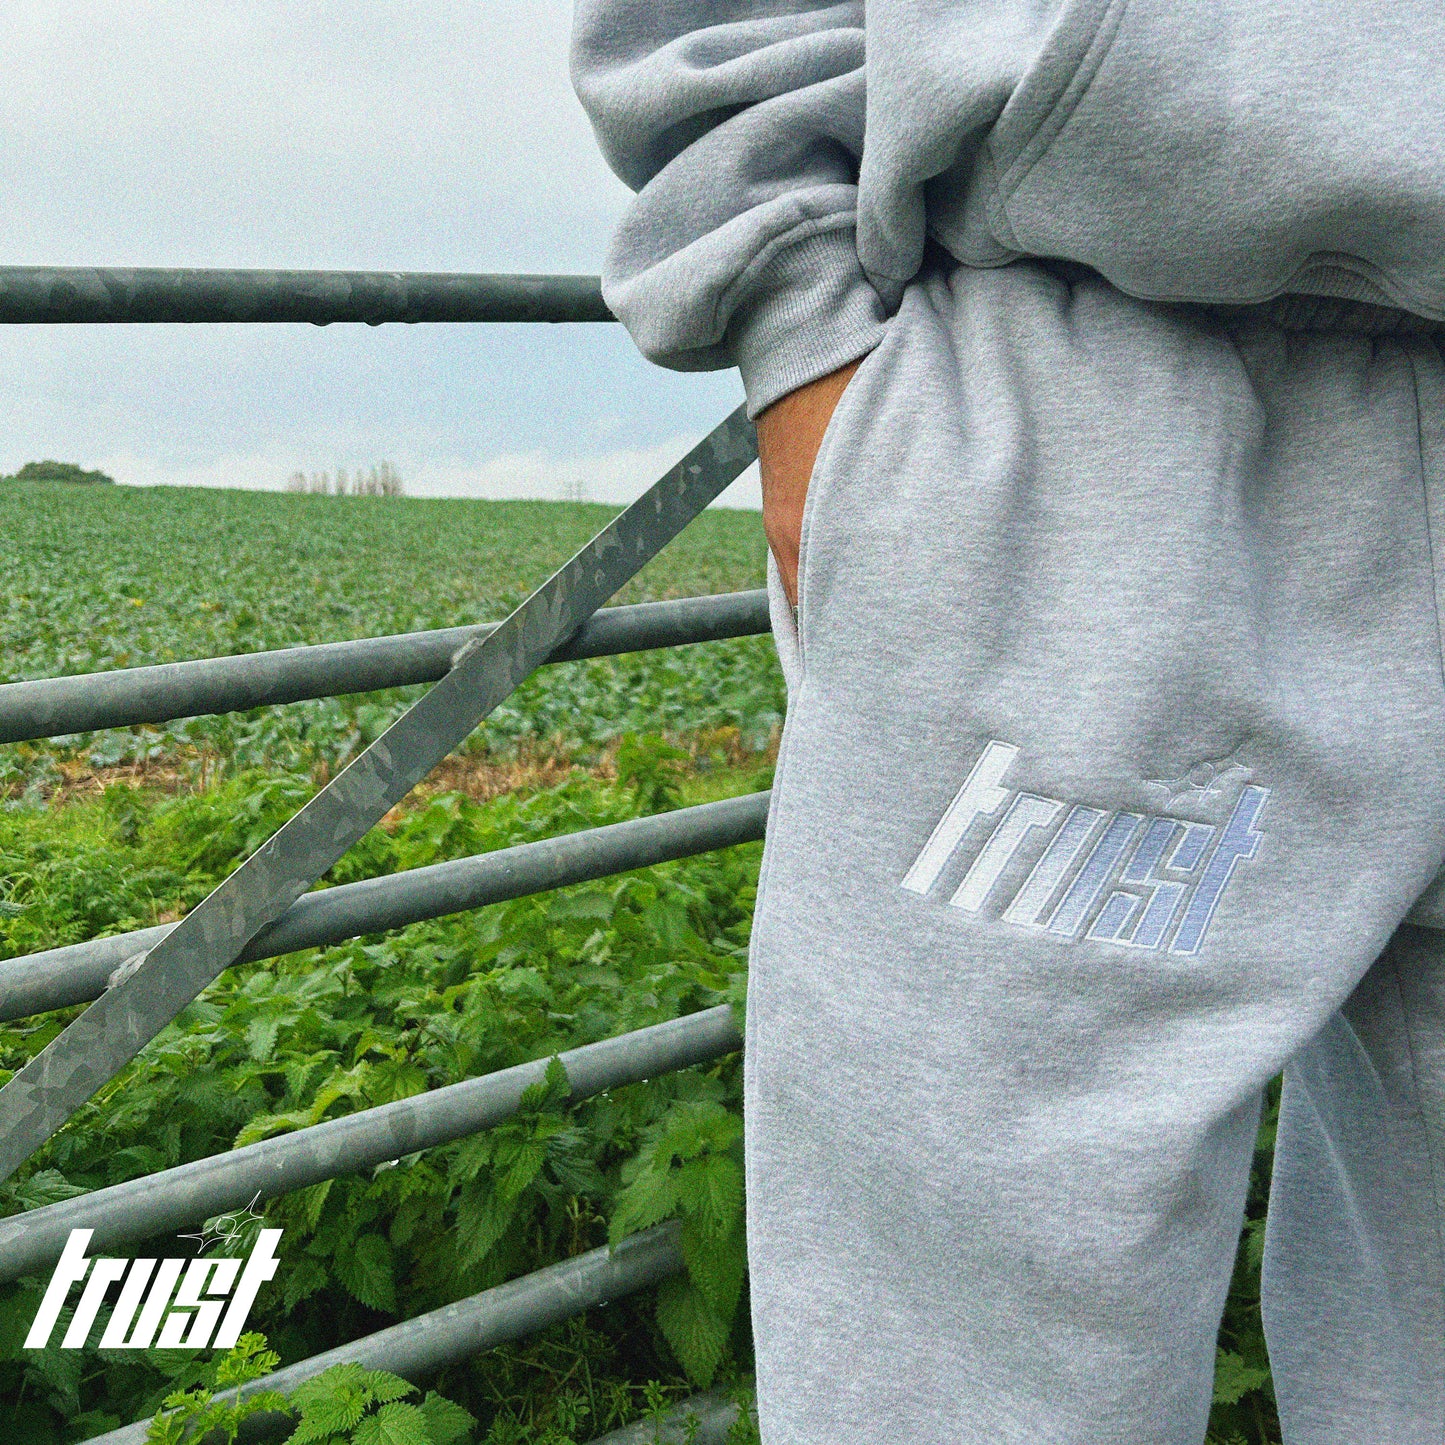 EMBROIDERED HEAVYWEIGHT TRUST JOGGERS [GREY]